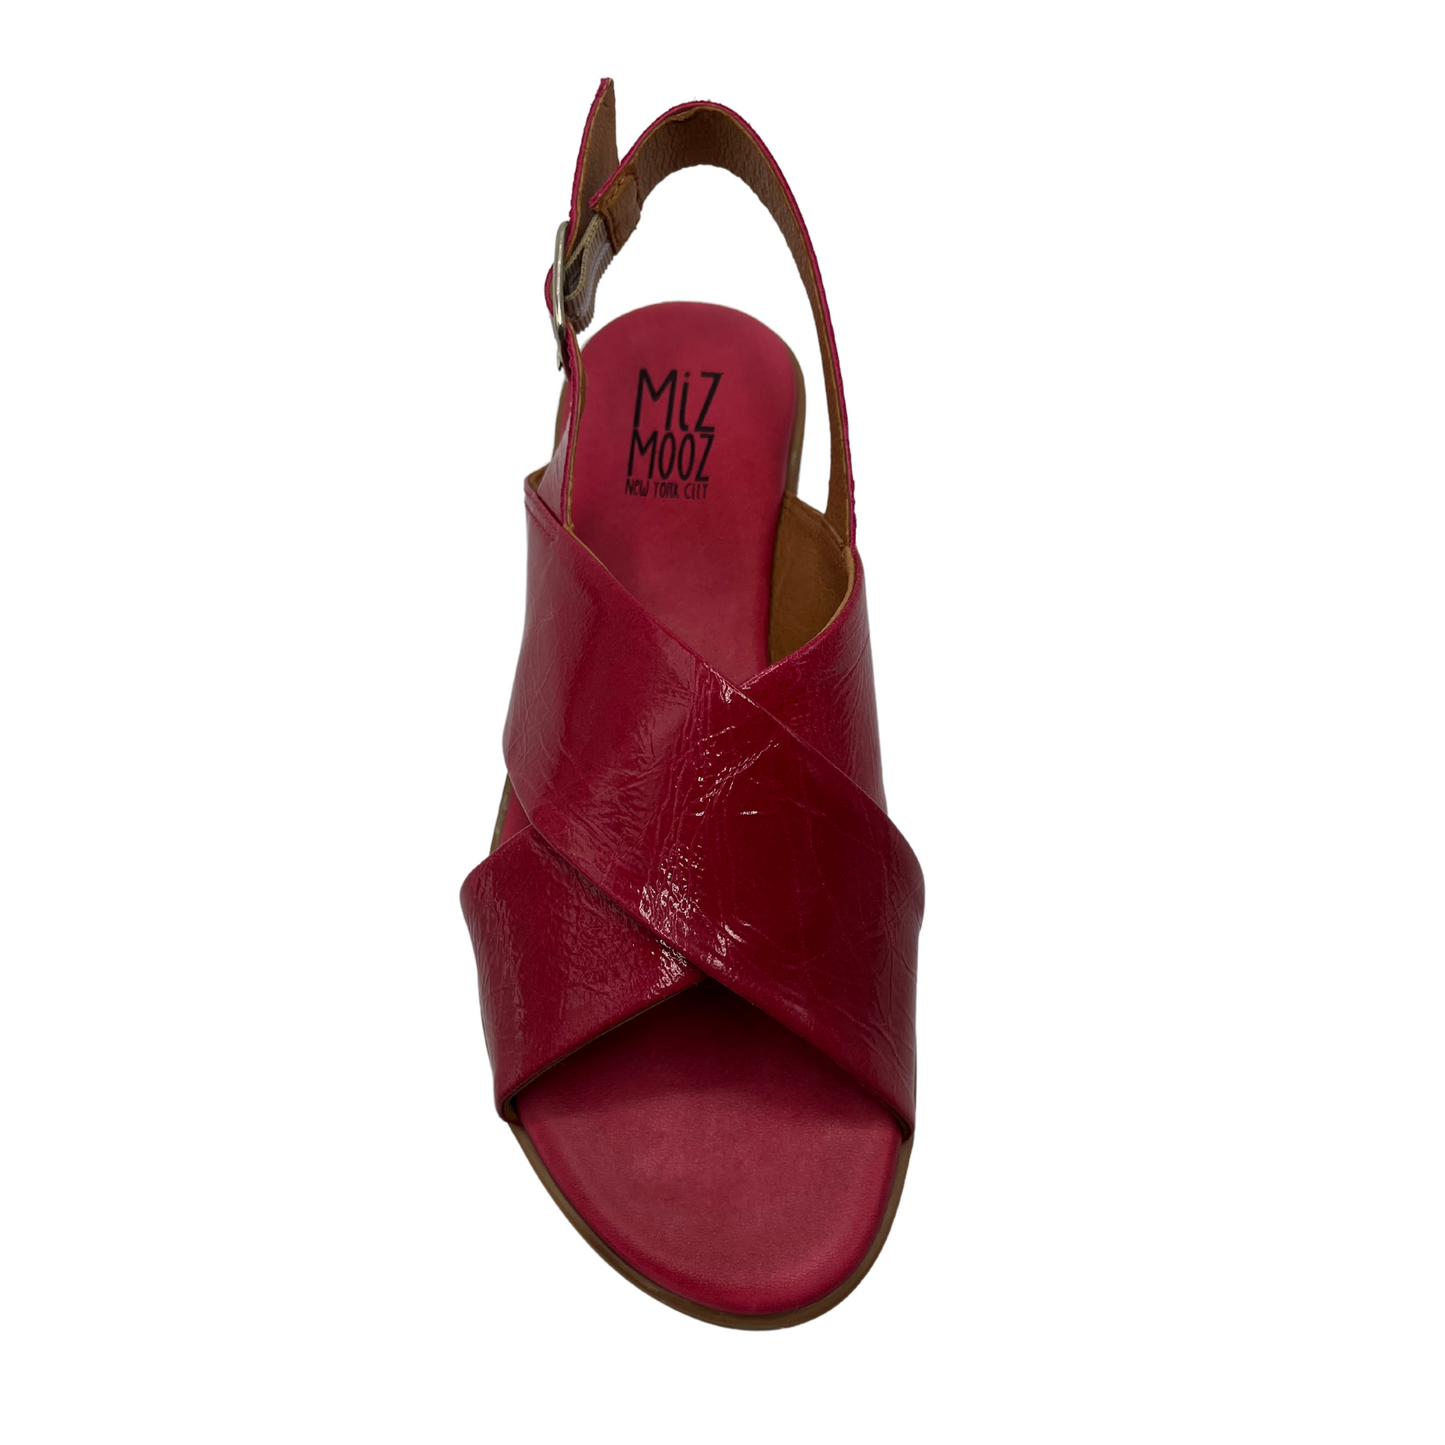 Top view of fuchsia leather flat sandal with low heel, buckle sling back strap and open toe